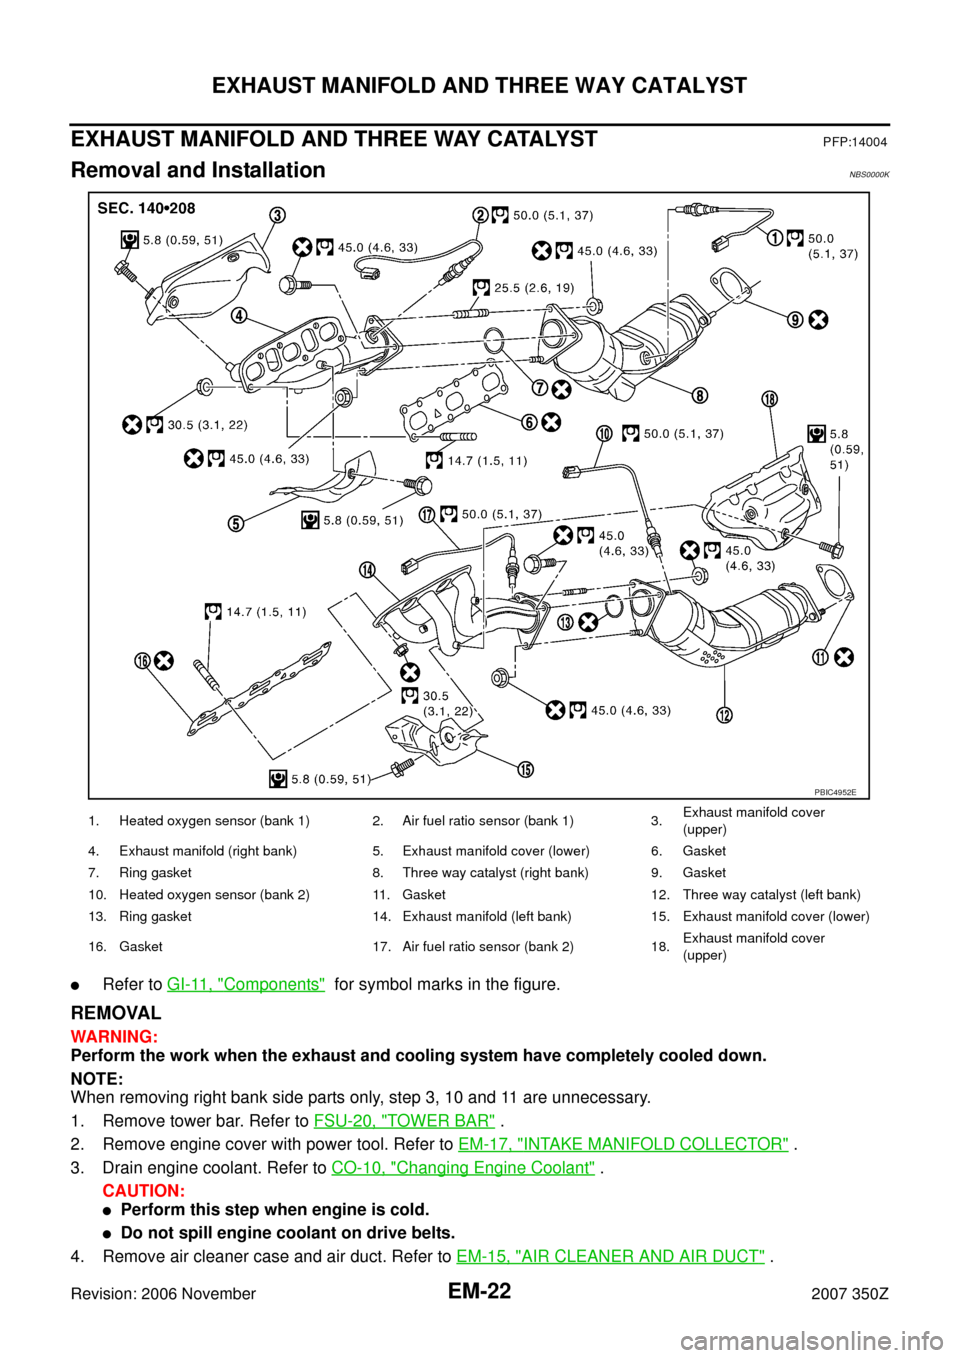 NISSAN 350Z 2007 Z33 Engine Mechanical Owners Manual EM-22
EXHAUST MANIFOLD AND THREE WAY CATALYST
Revision: 2006 November2007 350Z
EXHAUST MANIFOLD AND THREE WAY CATALYSTPFP:14004
Removal and InstallationNBS0000K
Refer to GI-11, "Components"  for symb